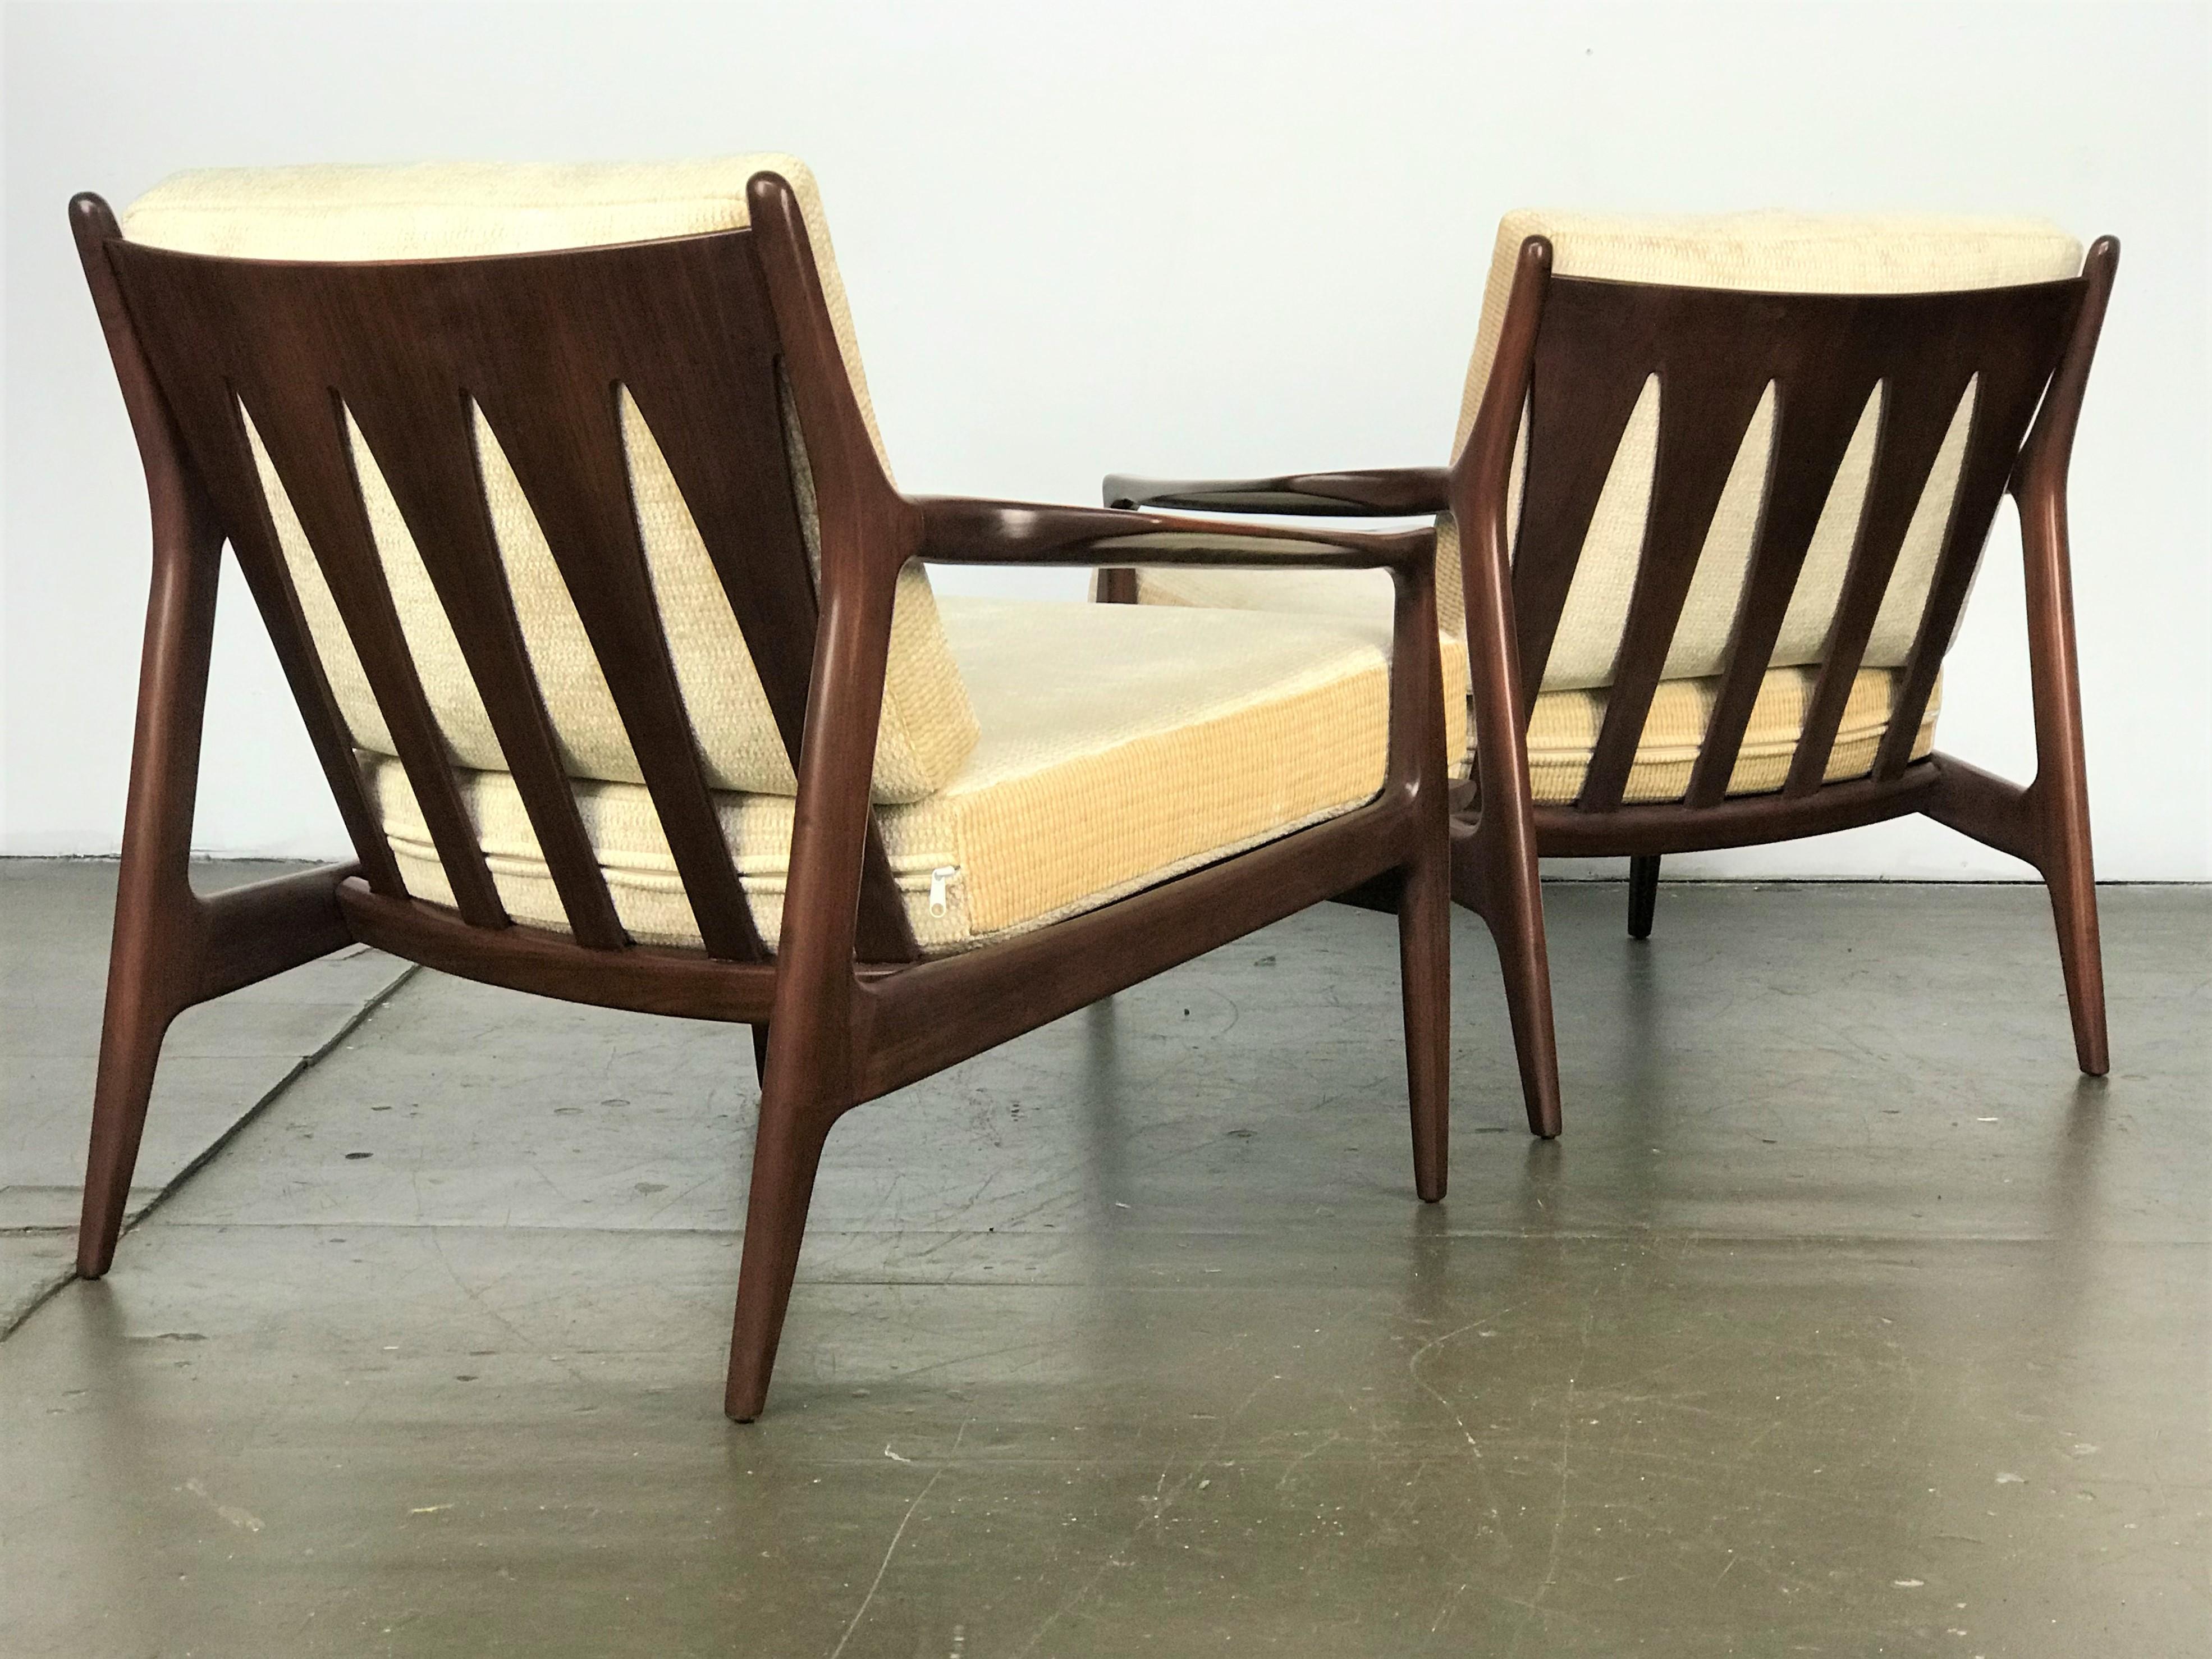 Scare and early pair of sculptural low back 'Archie' chairs designed by Milo Baughman for Thayer Coggin, circa 1965. Refinished walnut frames, with new cushions and upholstery. Both have early labels.
These excellent sculptural Cathedral-style-back